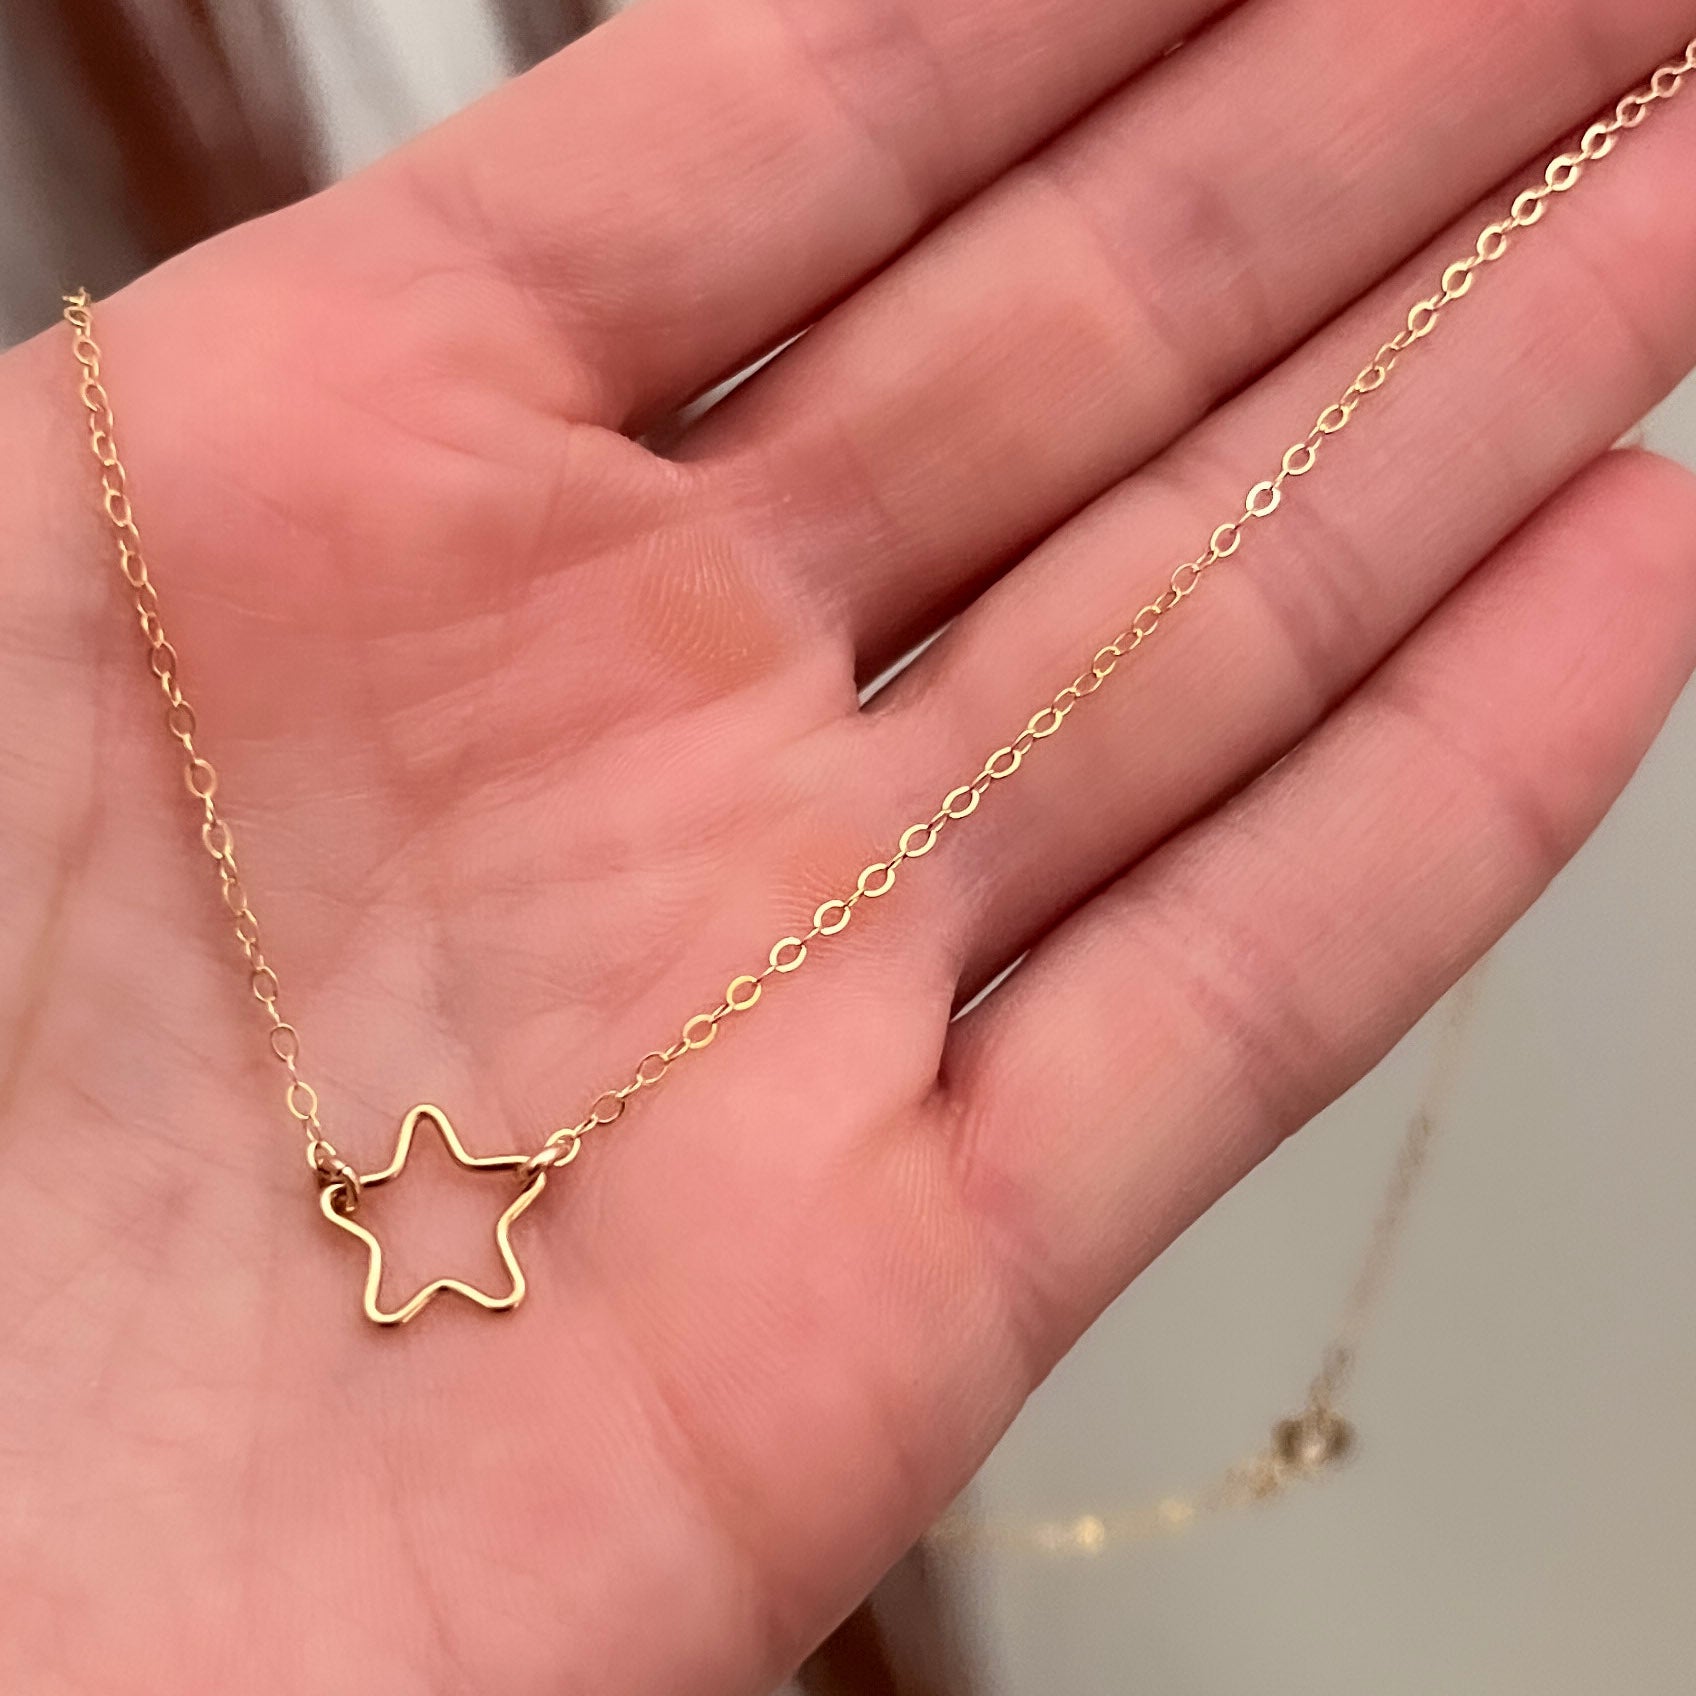 Open Star Necklace - Gold Filled or Sterling Silver - Sela+Sage - Pendant/Charm Necklace